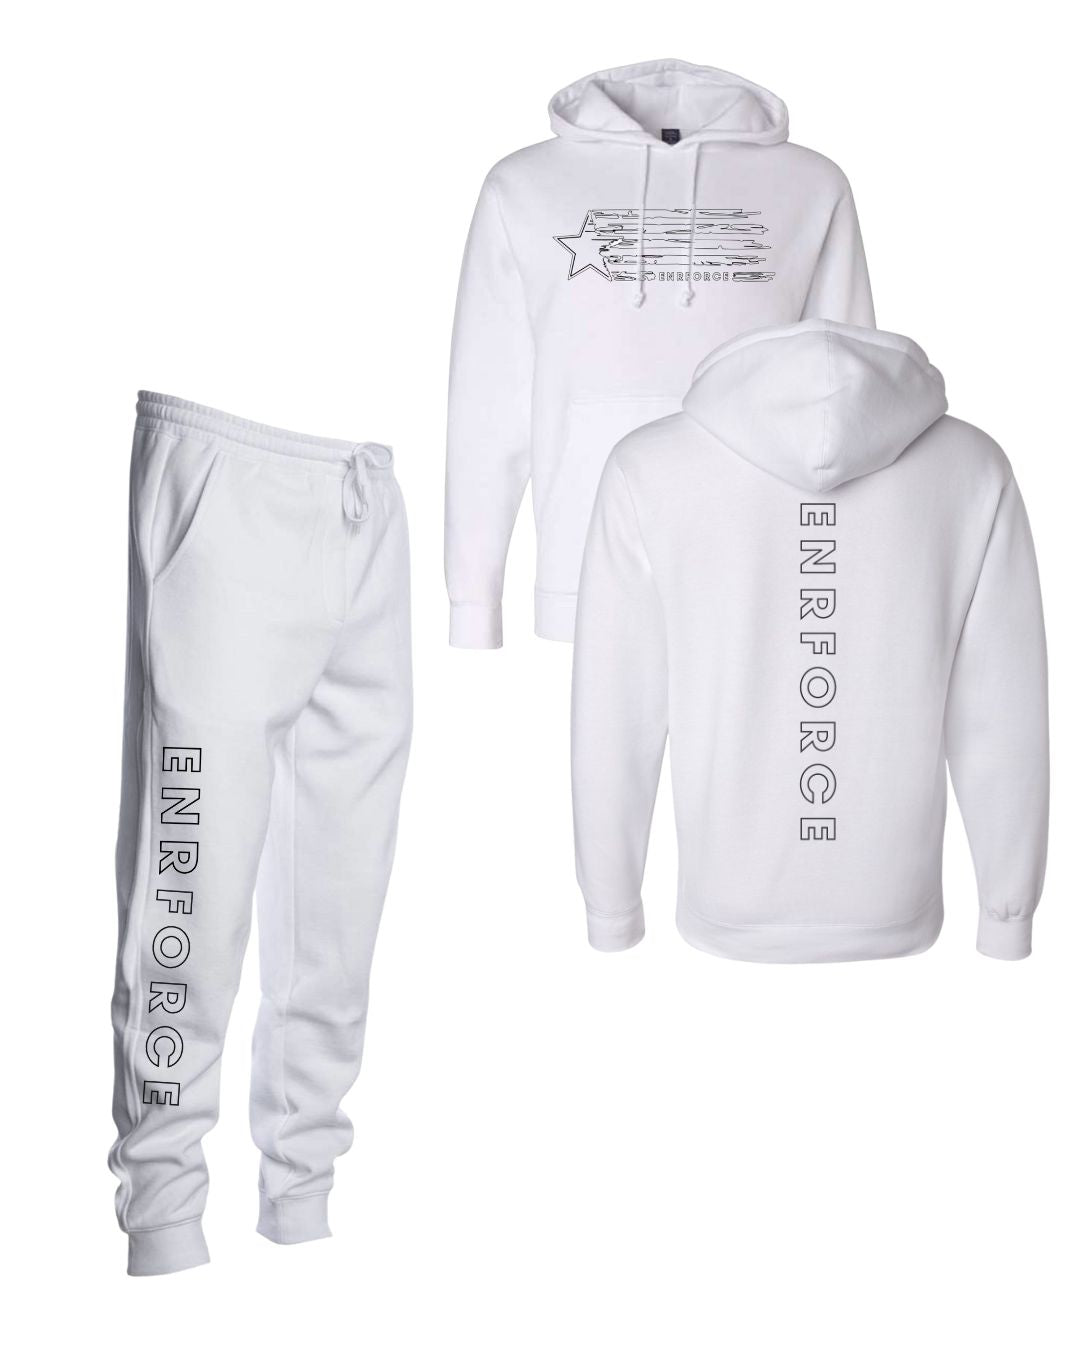 Limited White-out Bundle